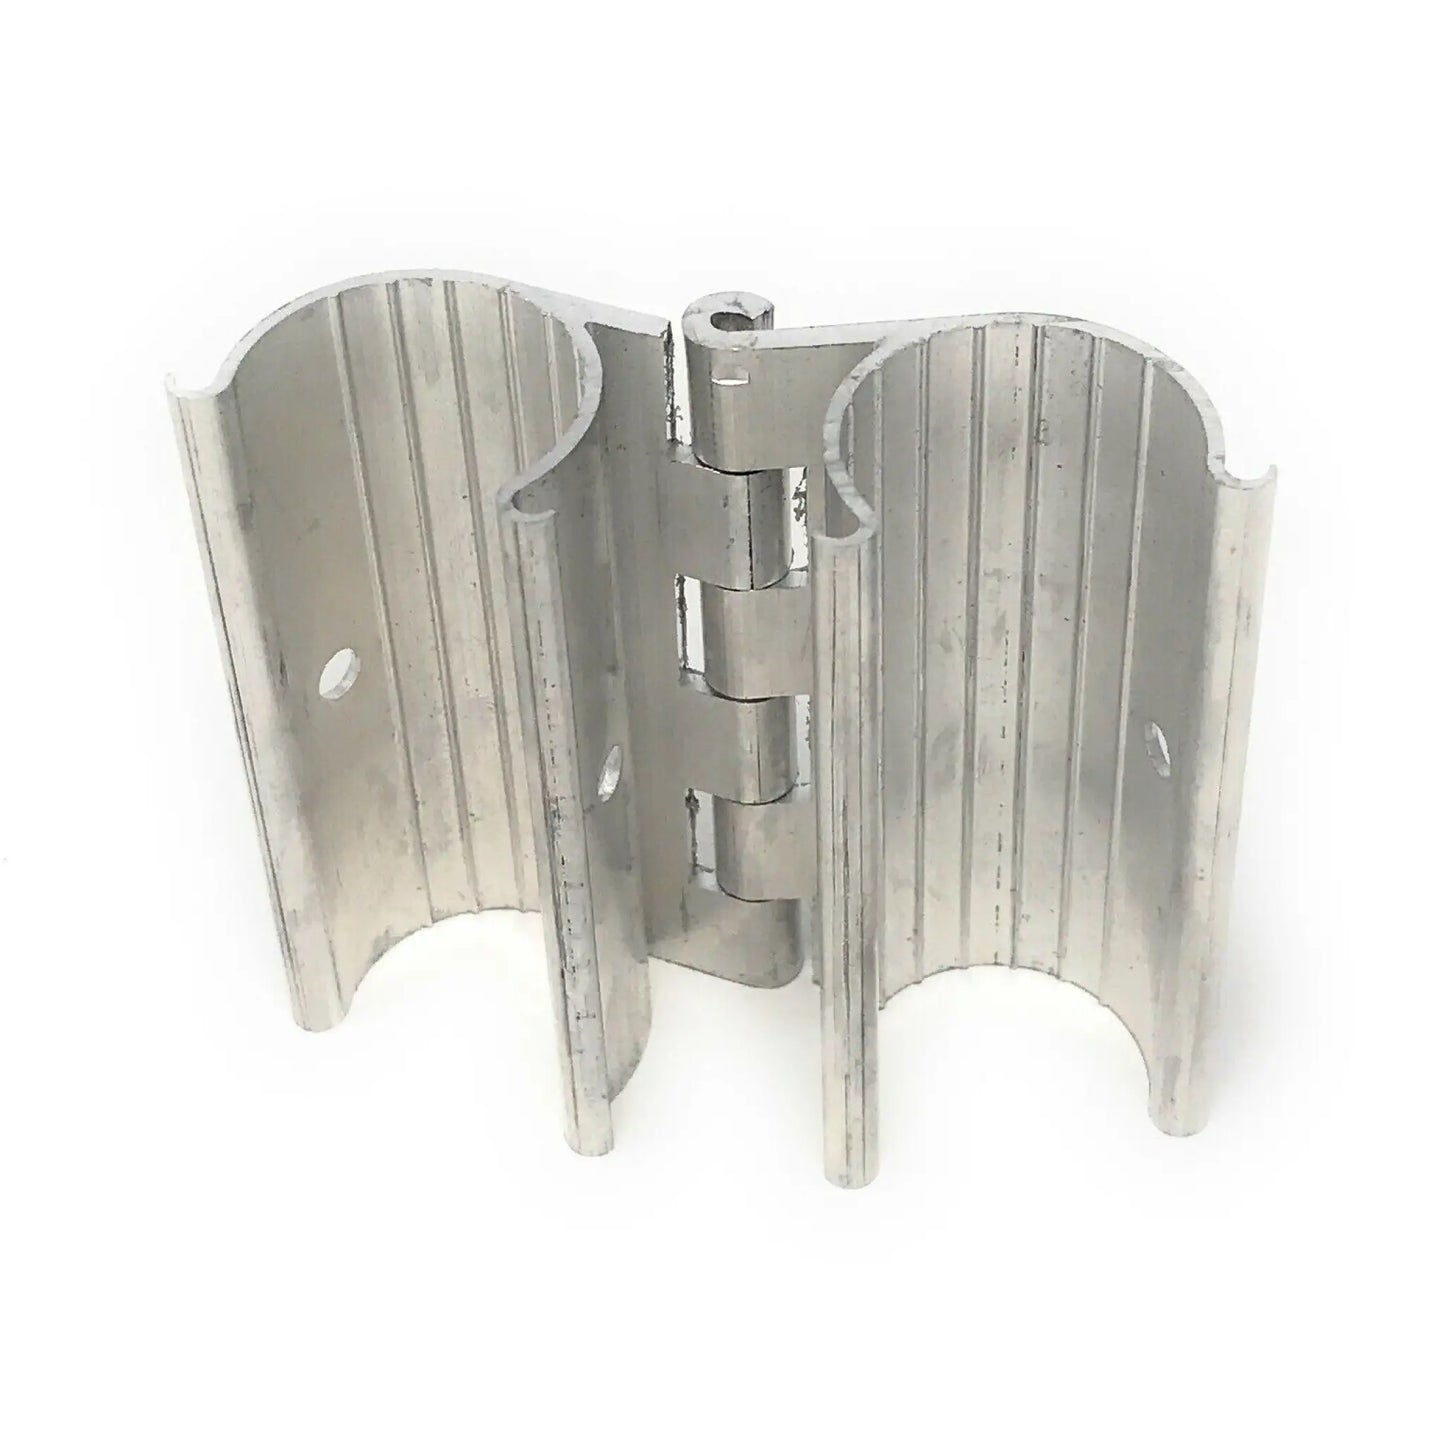 Aluminum Snap on Hinges for PVC pipes - 3/4